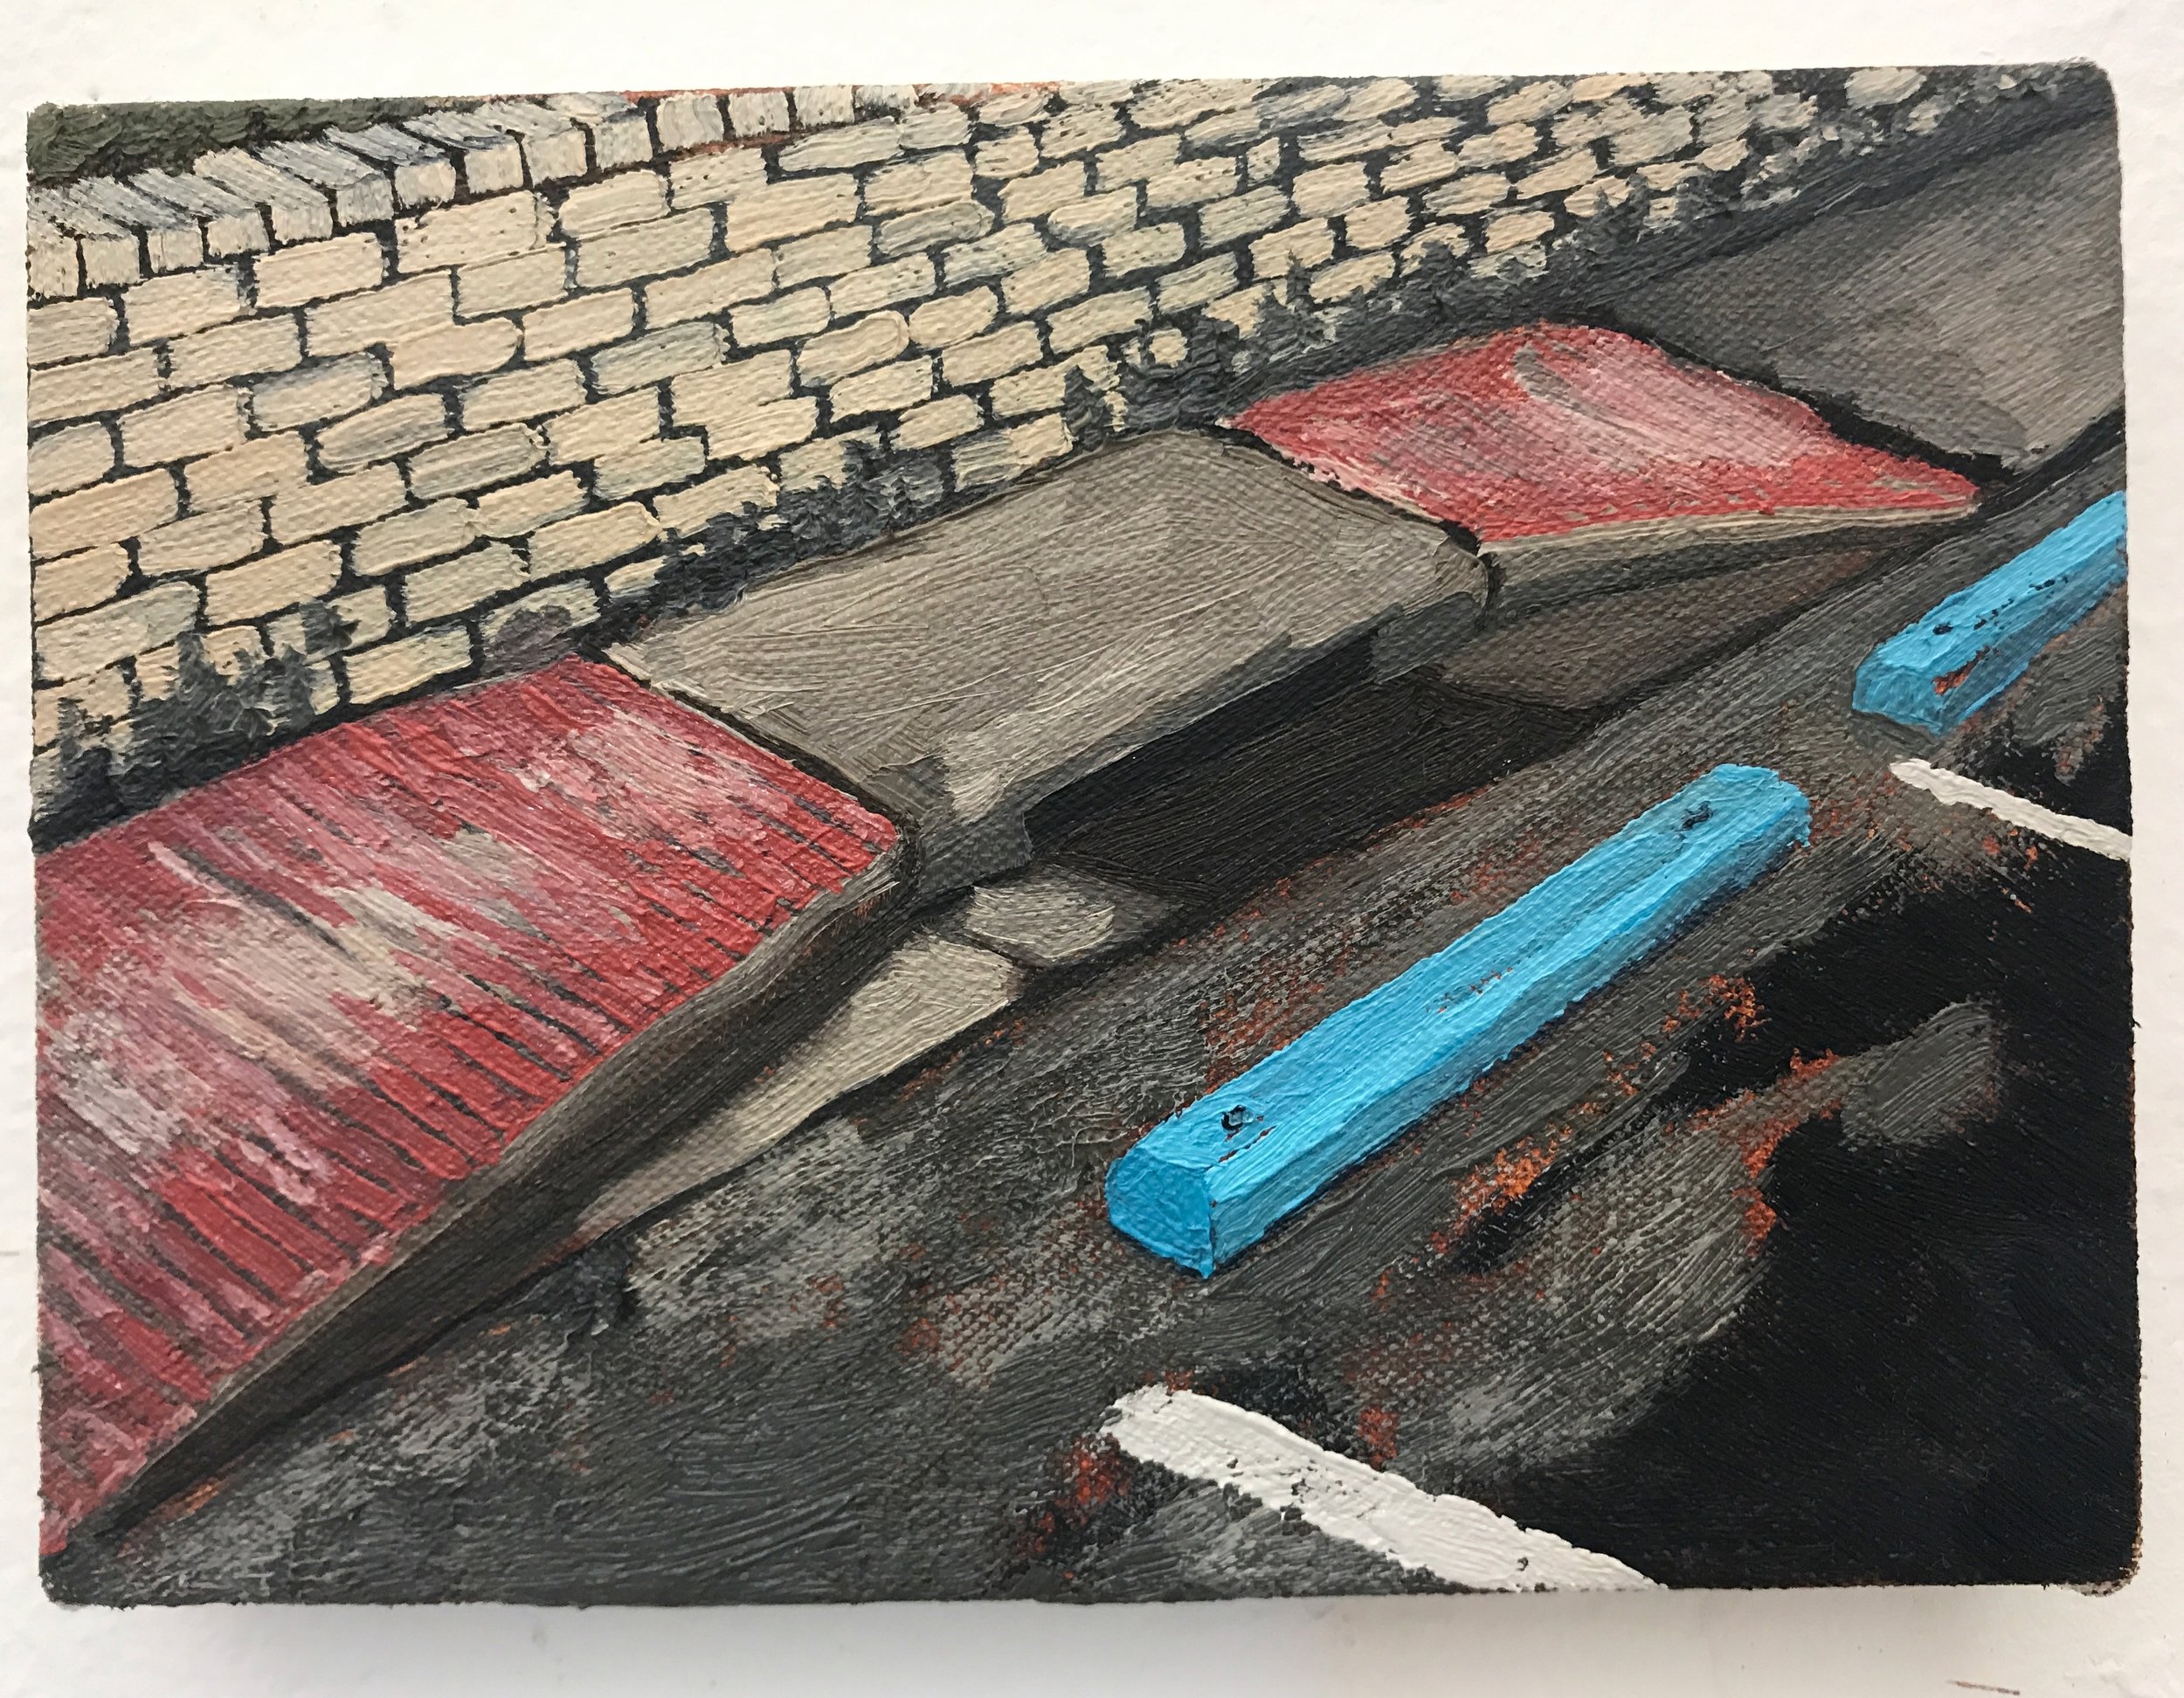 Drain in Red, White, and Blue / 2019 / oil on canvas / 5" x 7"